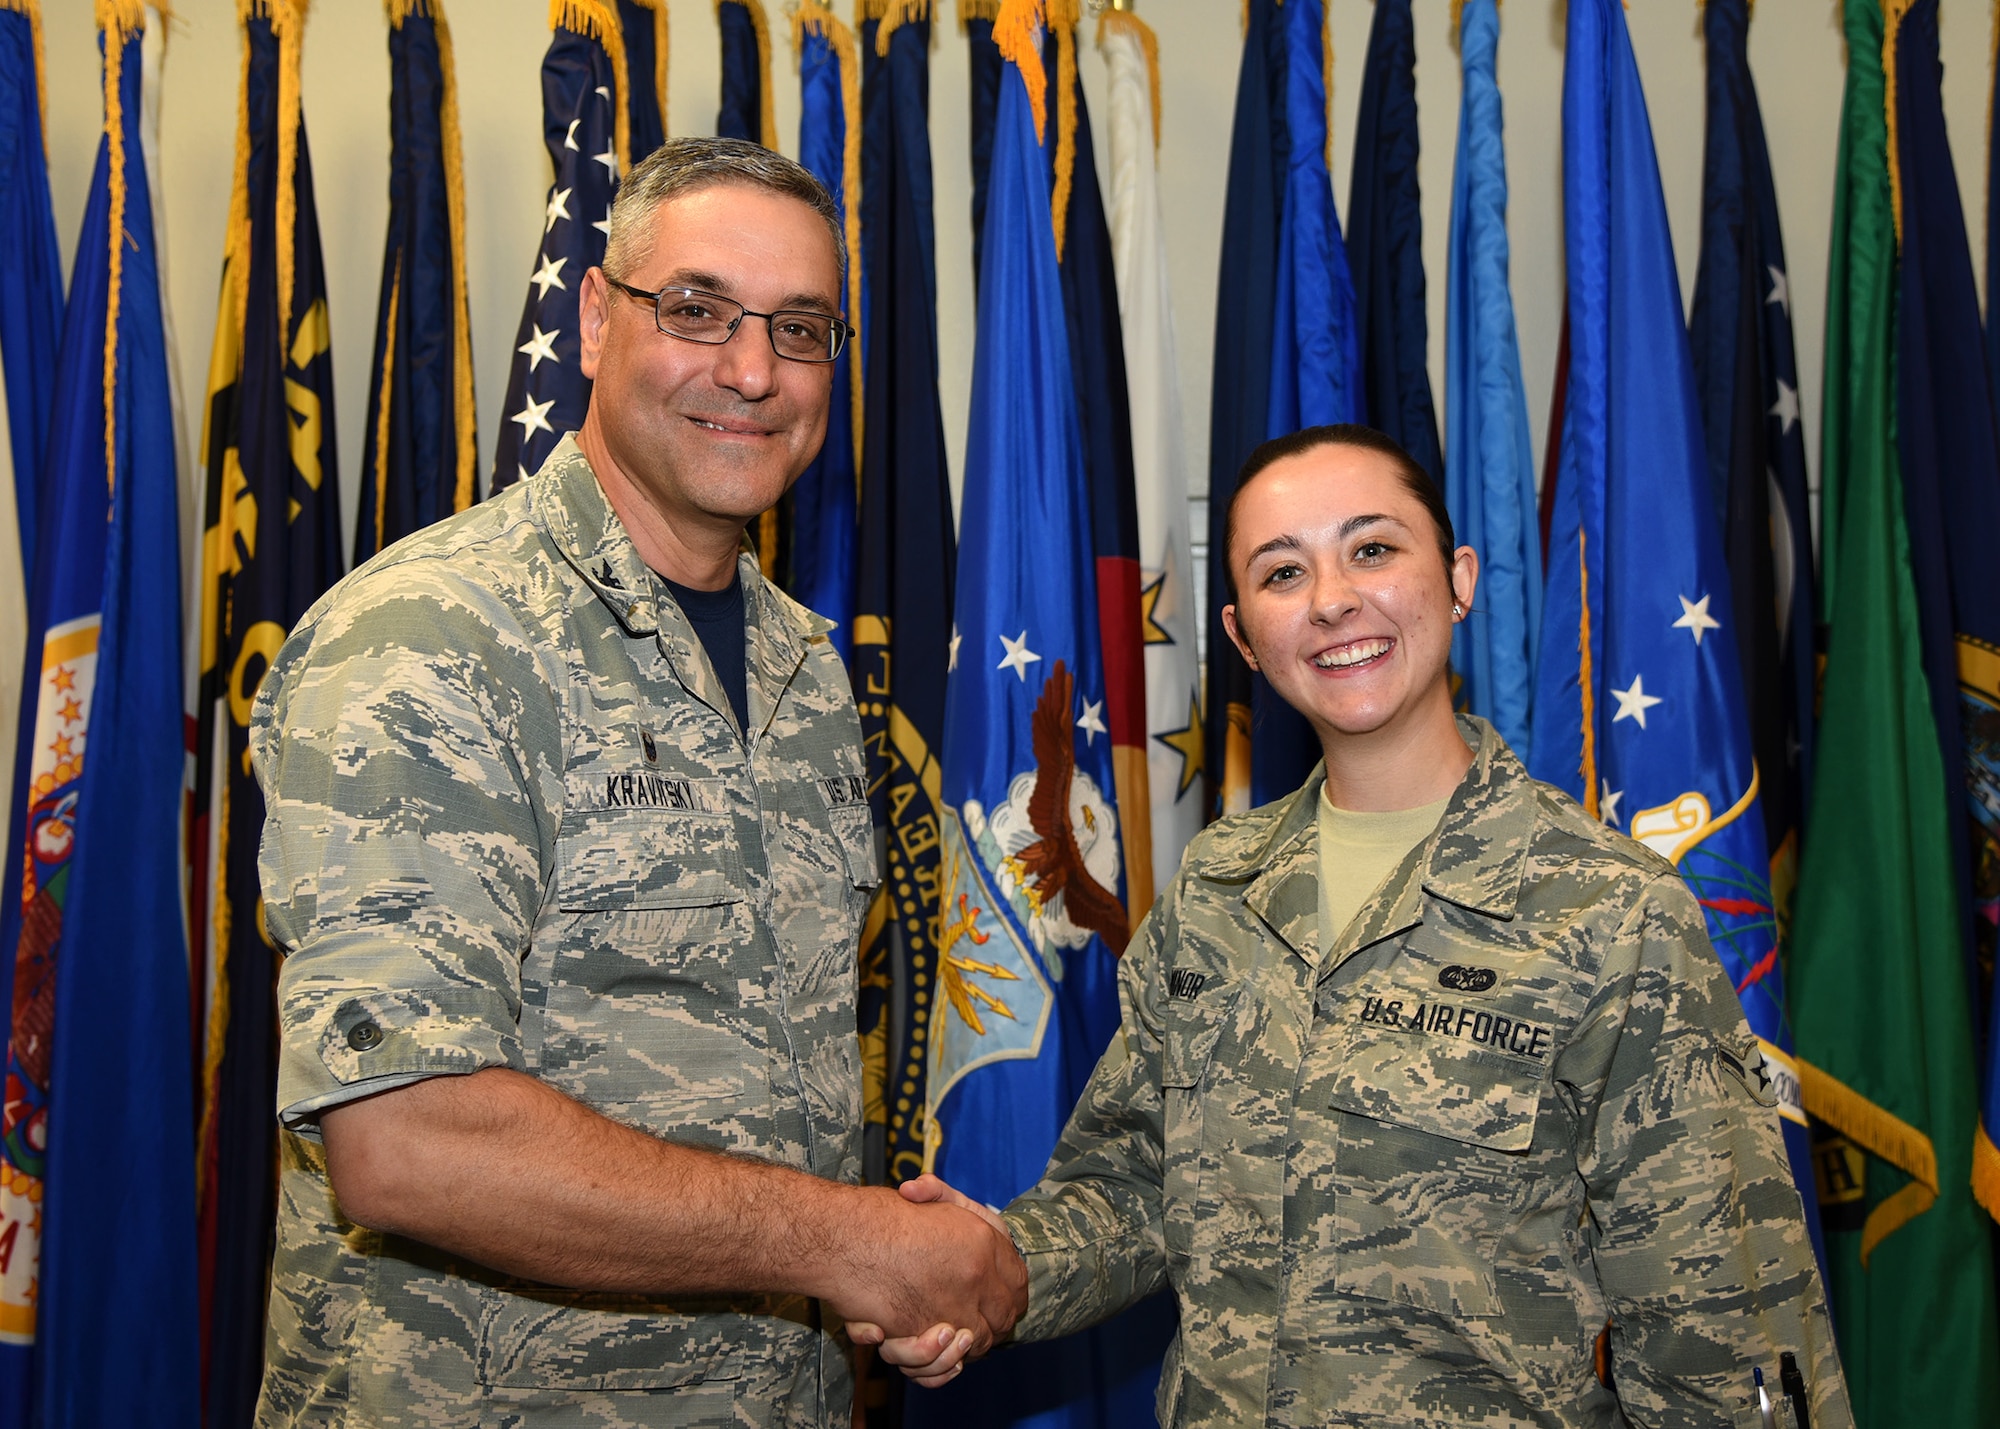 Col. Stephen Kravitsky, 90th Missile Wing commander and Airman Katrina Minor, 90th Missile Wing legal office paralegal, pose for a photo after spending the day together at F.E. Warren Air Force Base, Wyo., June 2, 2017. The shadowing program allows junior Airmen to accompany the commander for a day to learn how senior leaders lead the wing, tackle issues and make critical decisions. (U.S. Air Force Photo by Glenn Robertson)